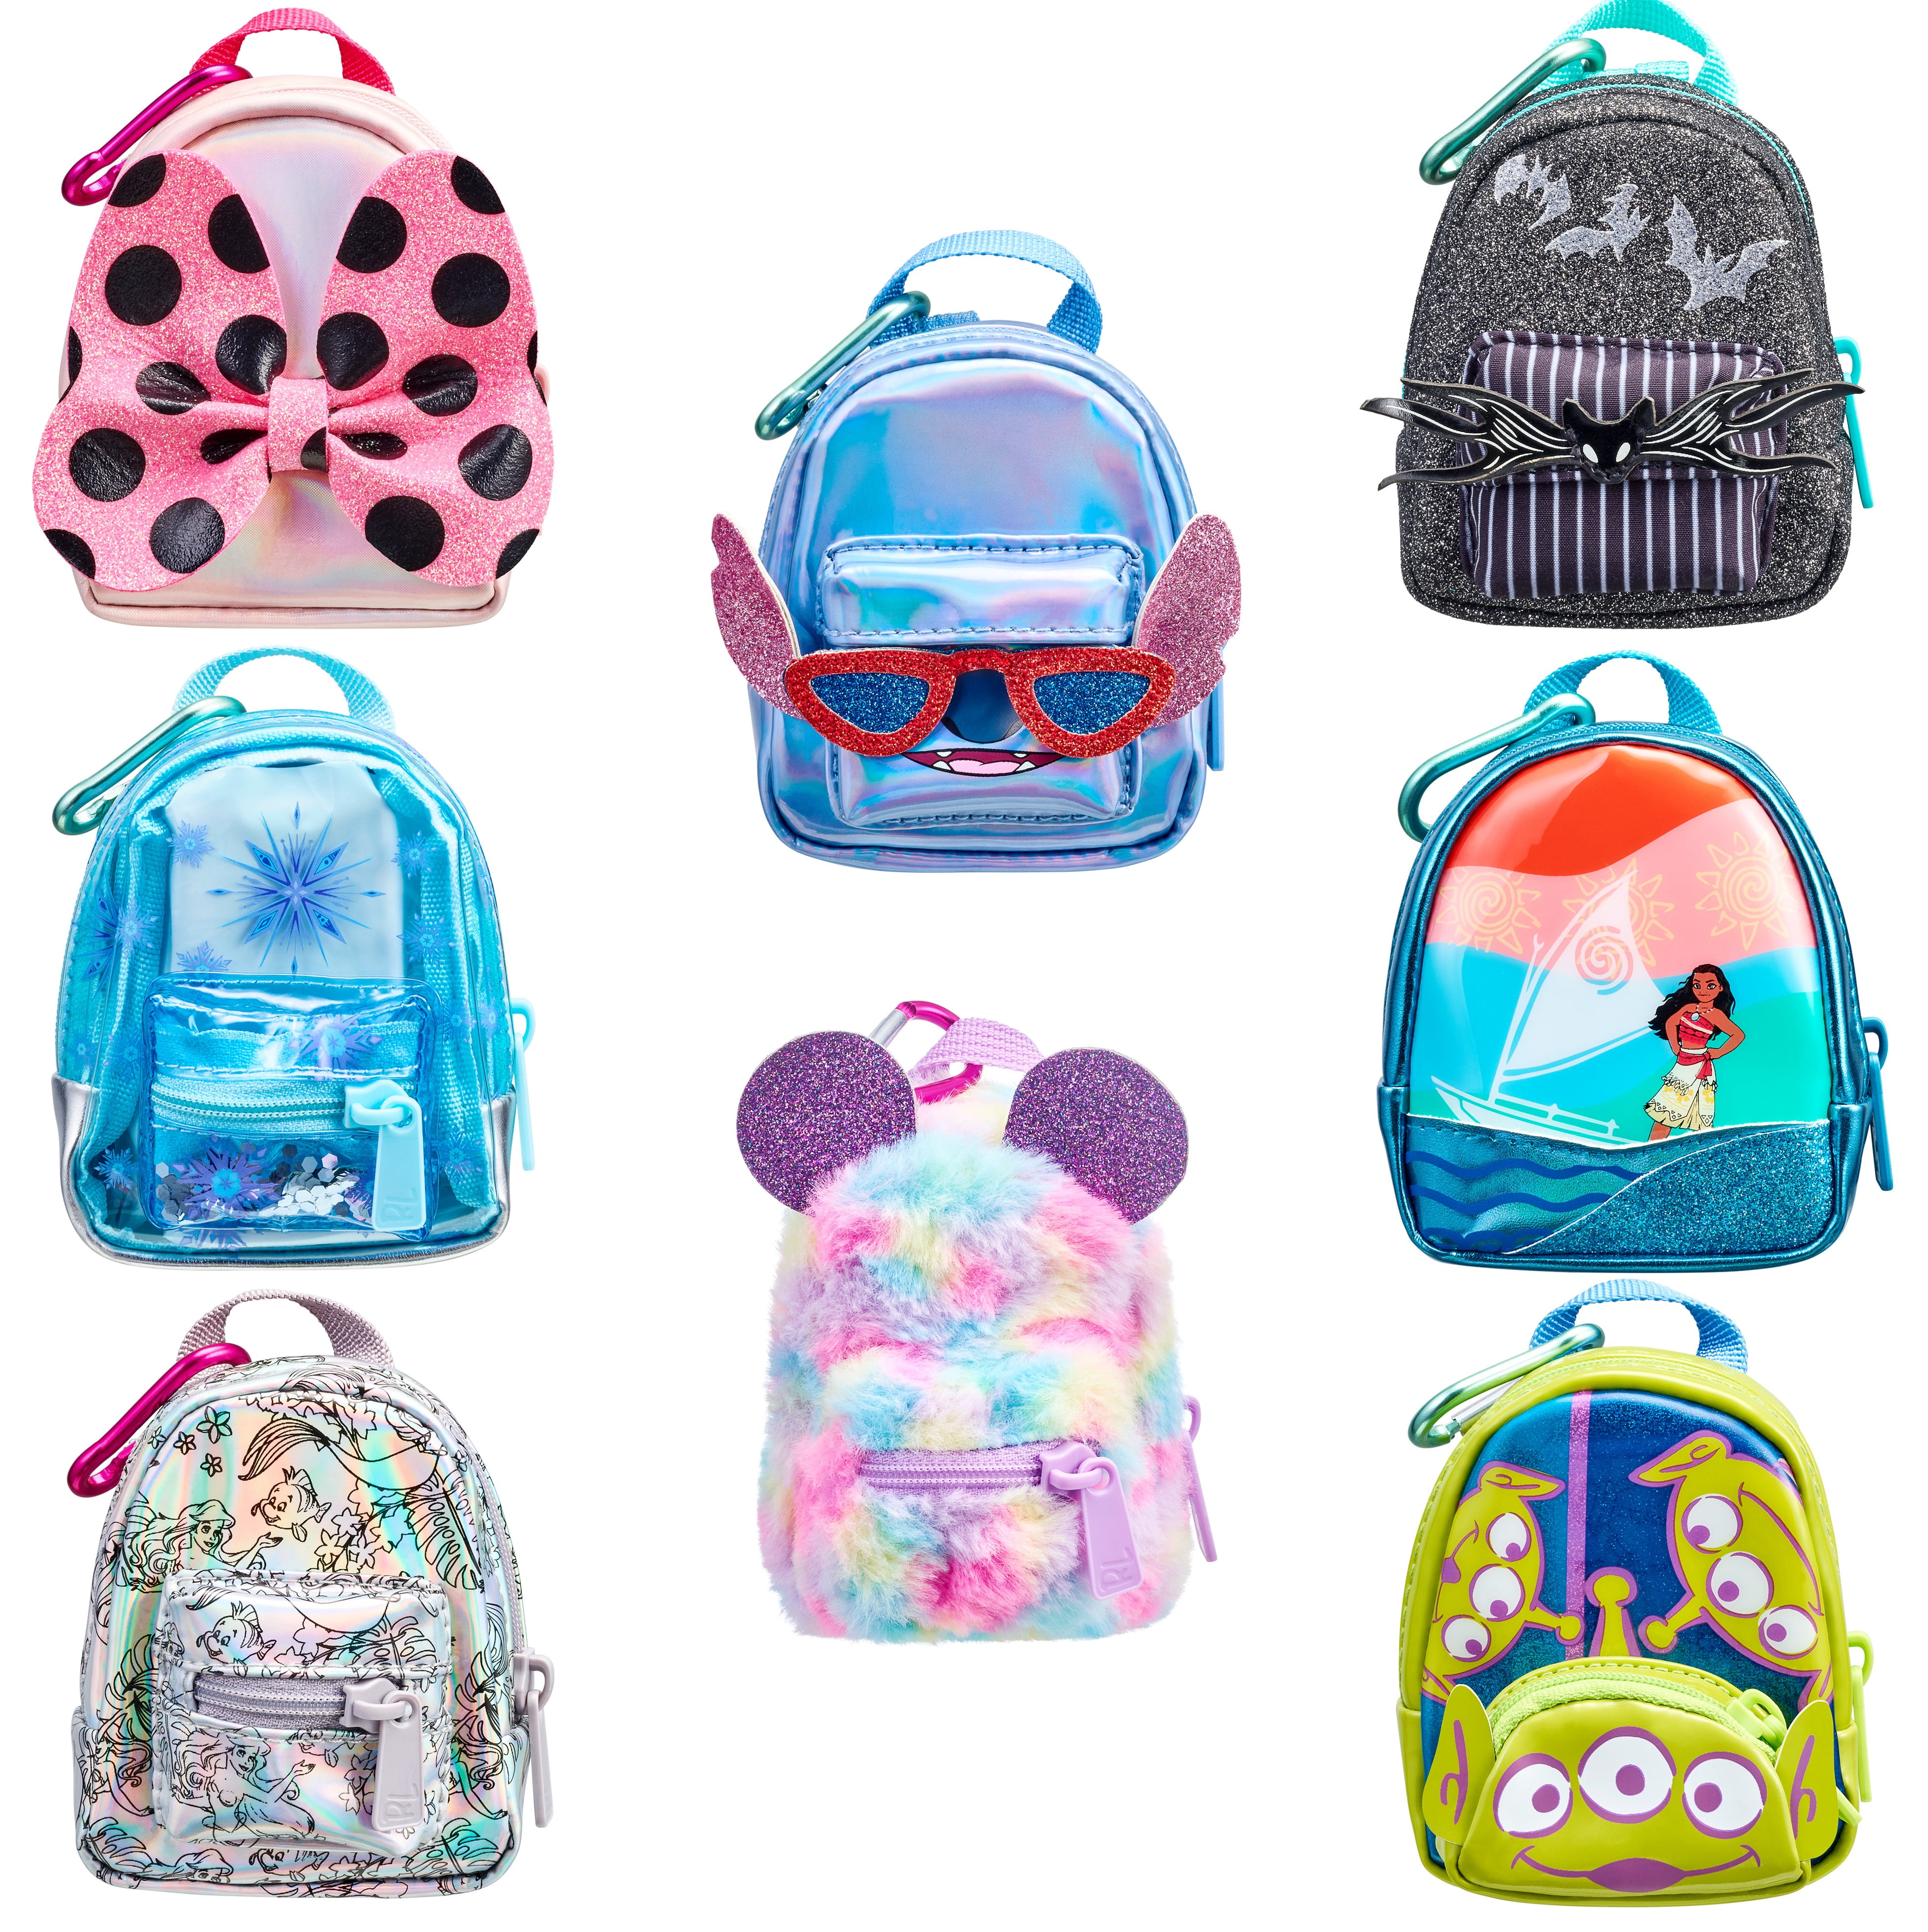 6 Pack of Mini Doll Backpacks for upto 8" Toy Dolls Colourful Bags Accessories 